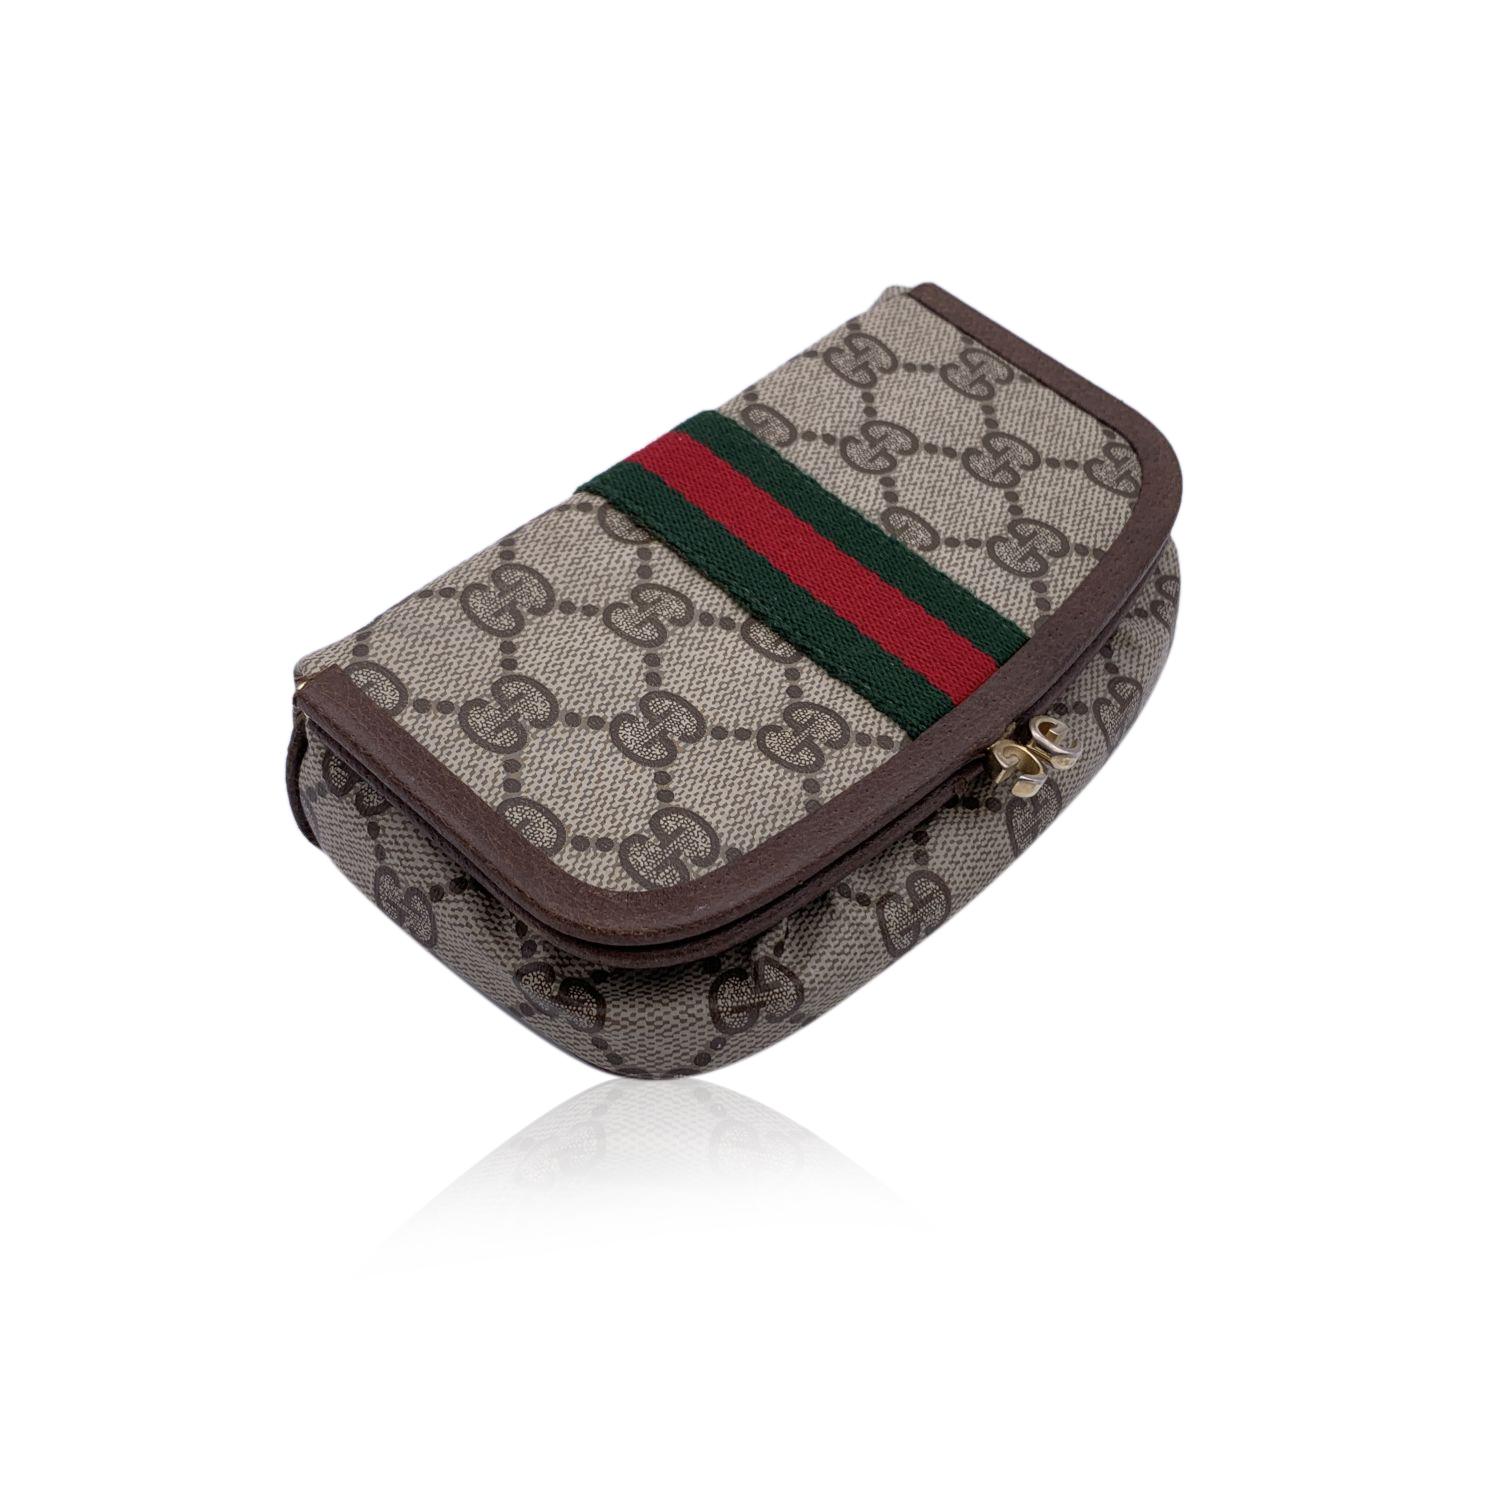 Gucci Vintage beige monogram canvas cosmetic case stripes. Beige Monogram Canvas with Genuine Leather trim. Green/Red/Green stripes around the bag. Buit-in mirror inside. Kiss lock closure. Brown lining. 